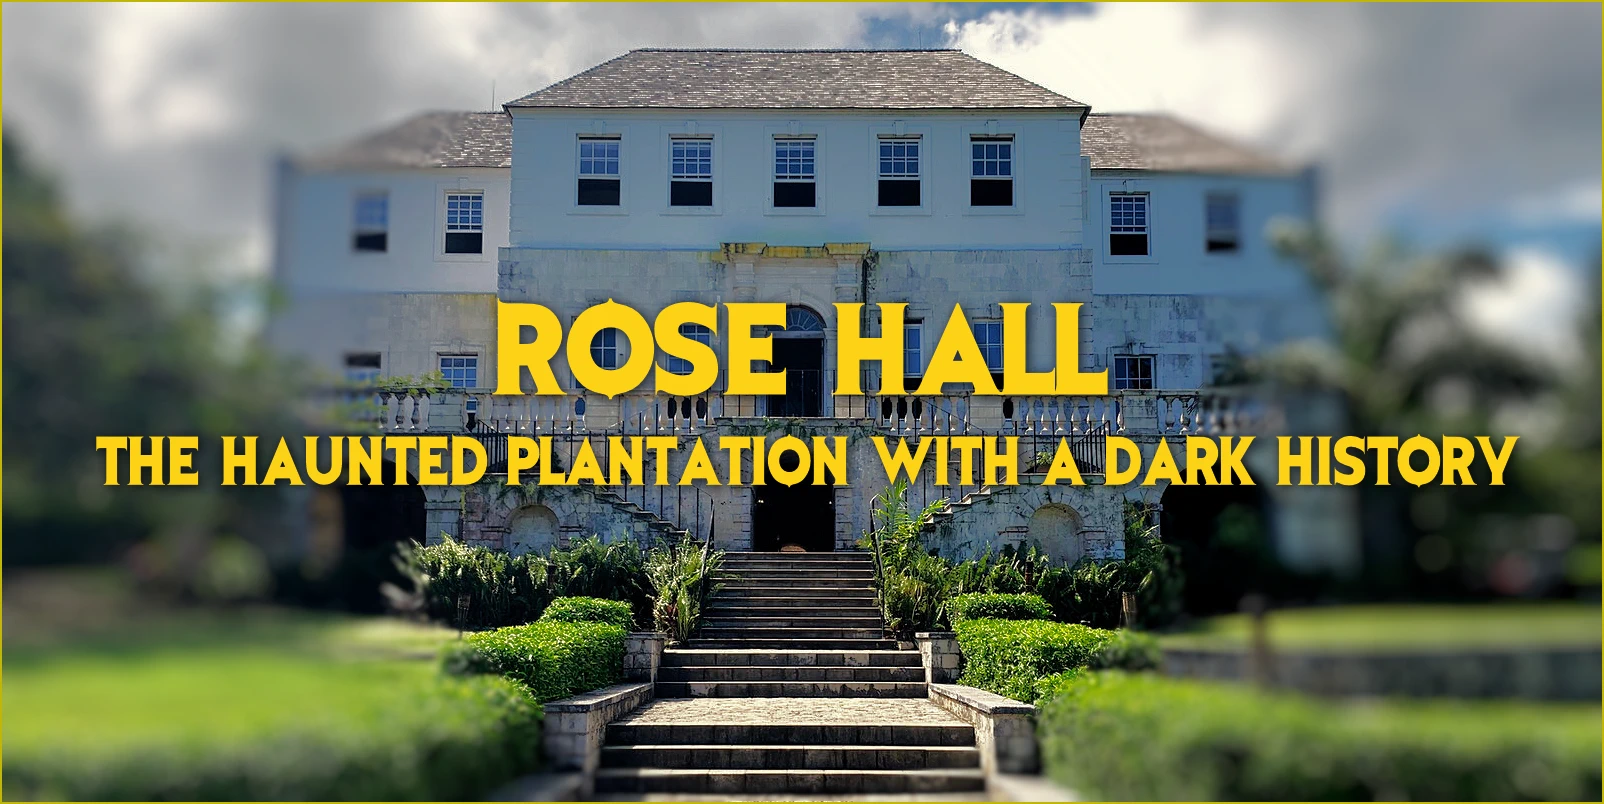 In Montego Bay, Jamaica, there is a well-known plantation by the name of Rose Hall